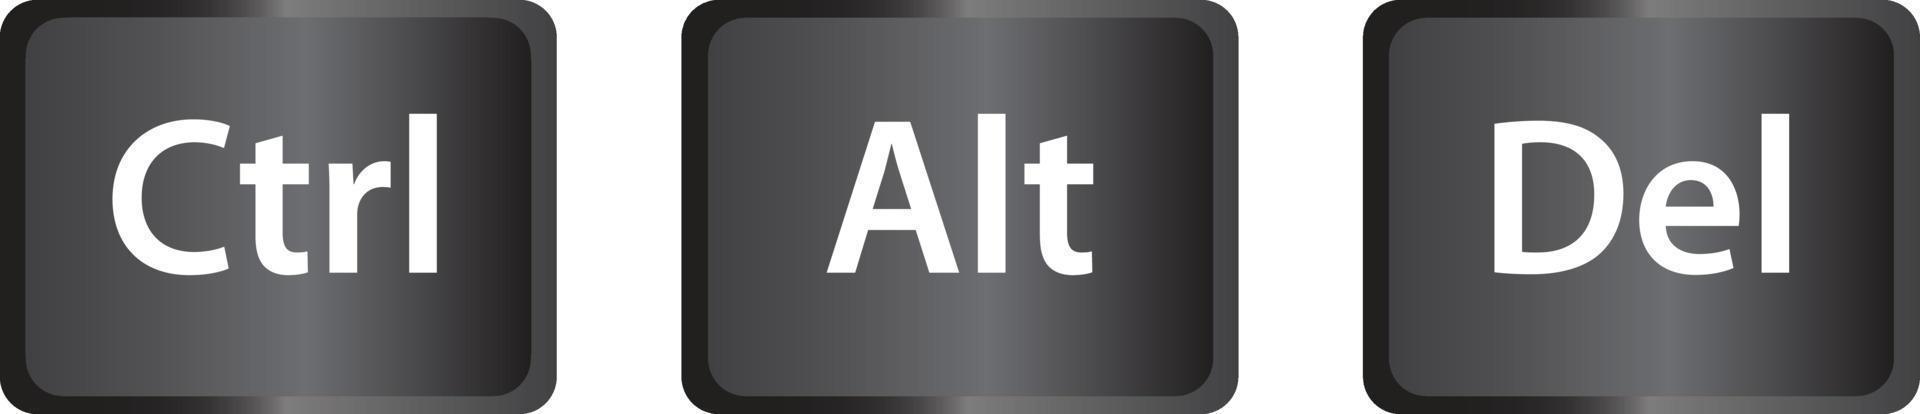 Ctrl, Alt and Del on white background. keyboard shortcut icon. three button for fix computer symbol. vector